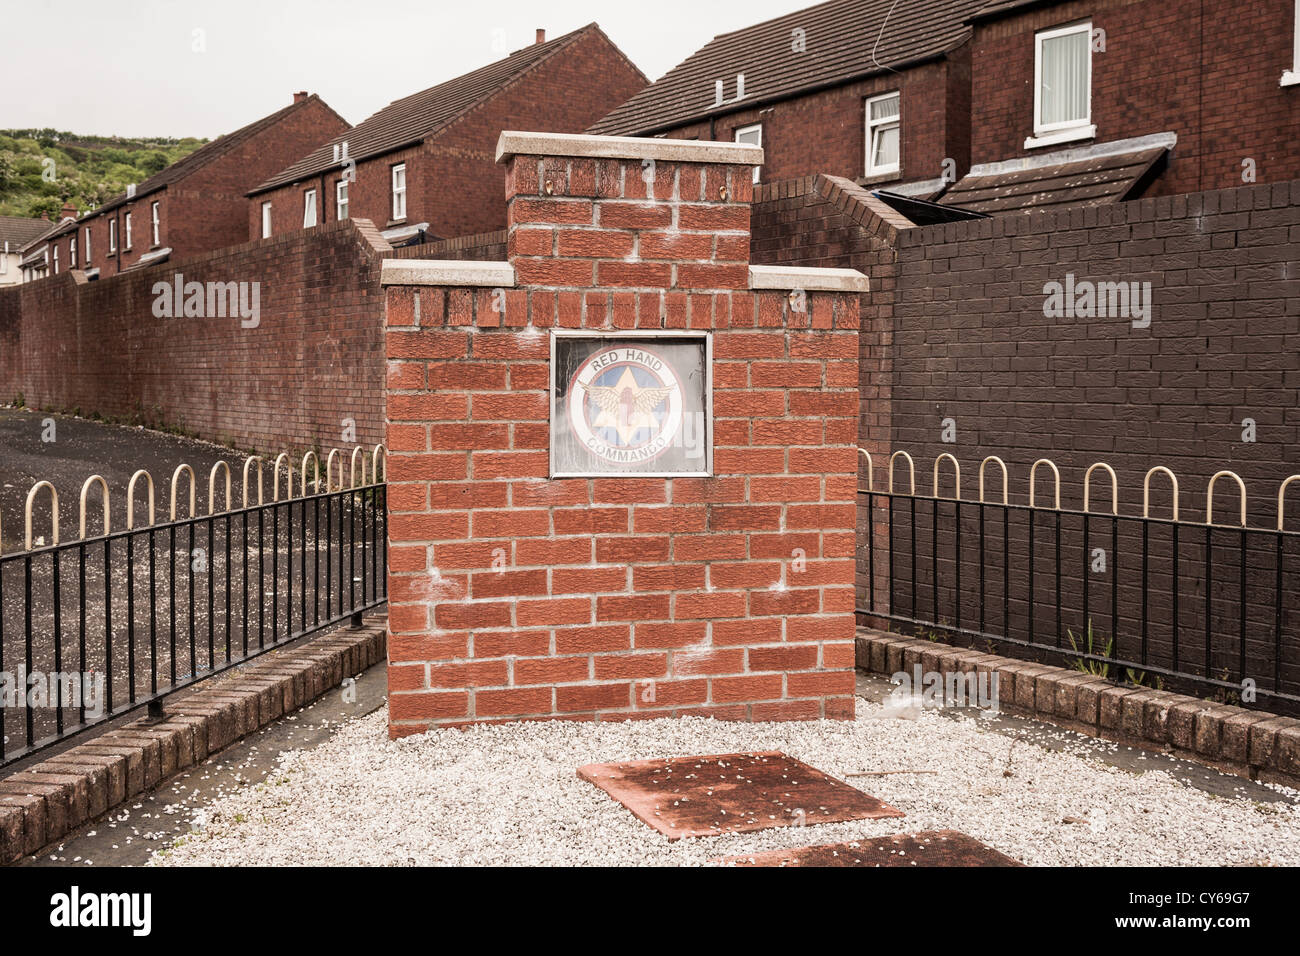 Monument to the Red Hand Commando unit in Rathcoole, Belfast. Stock Photo